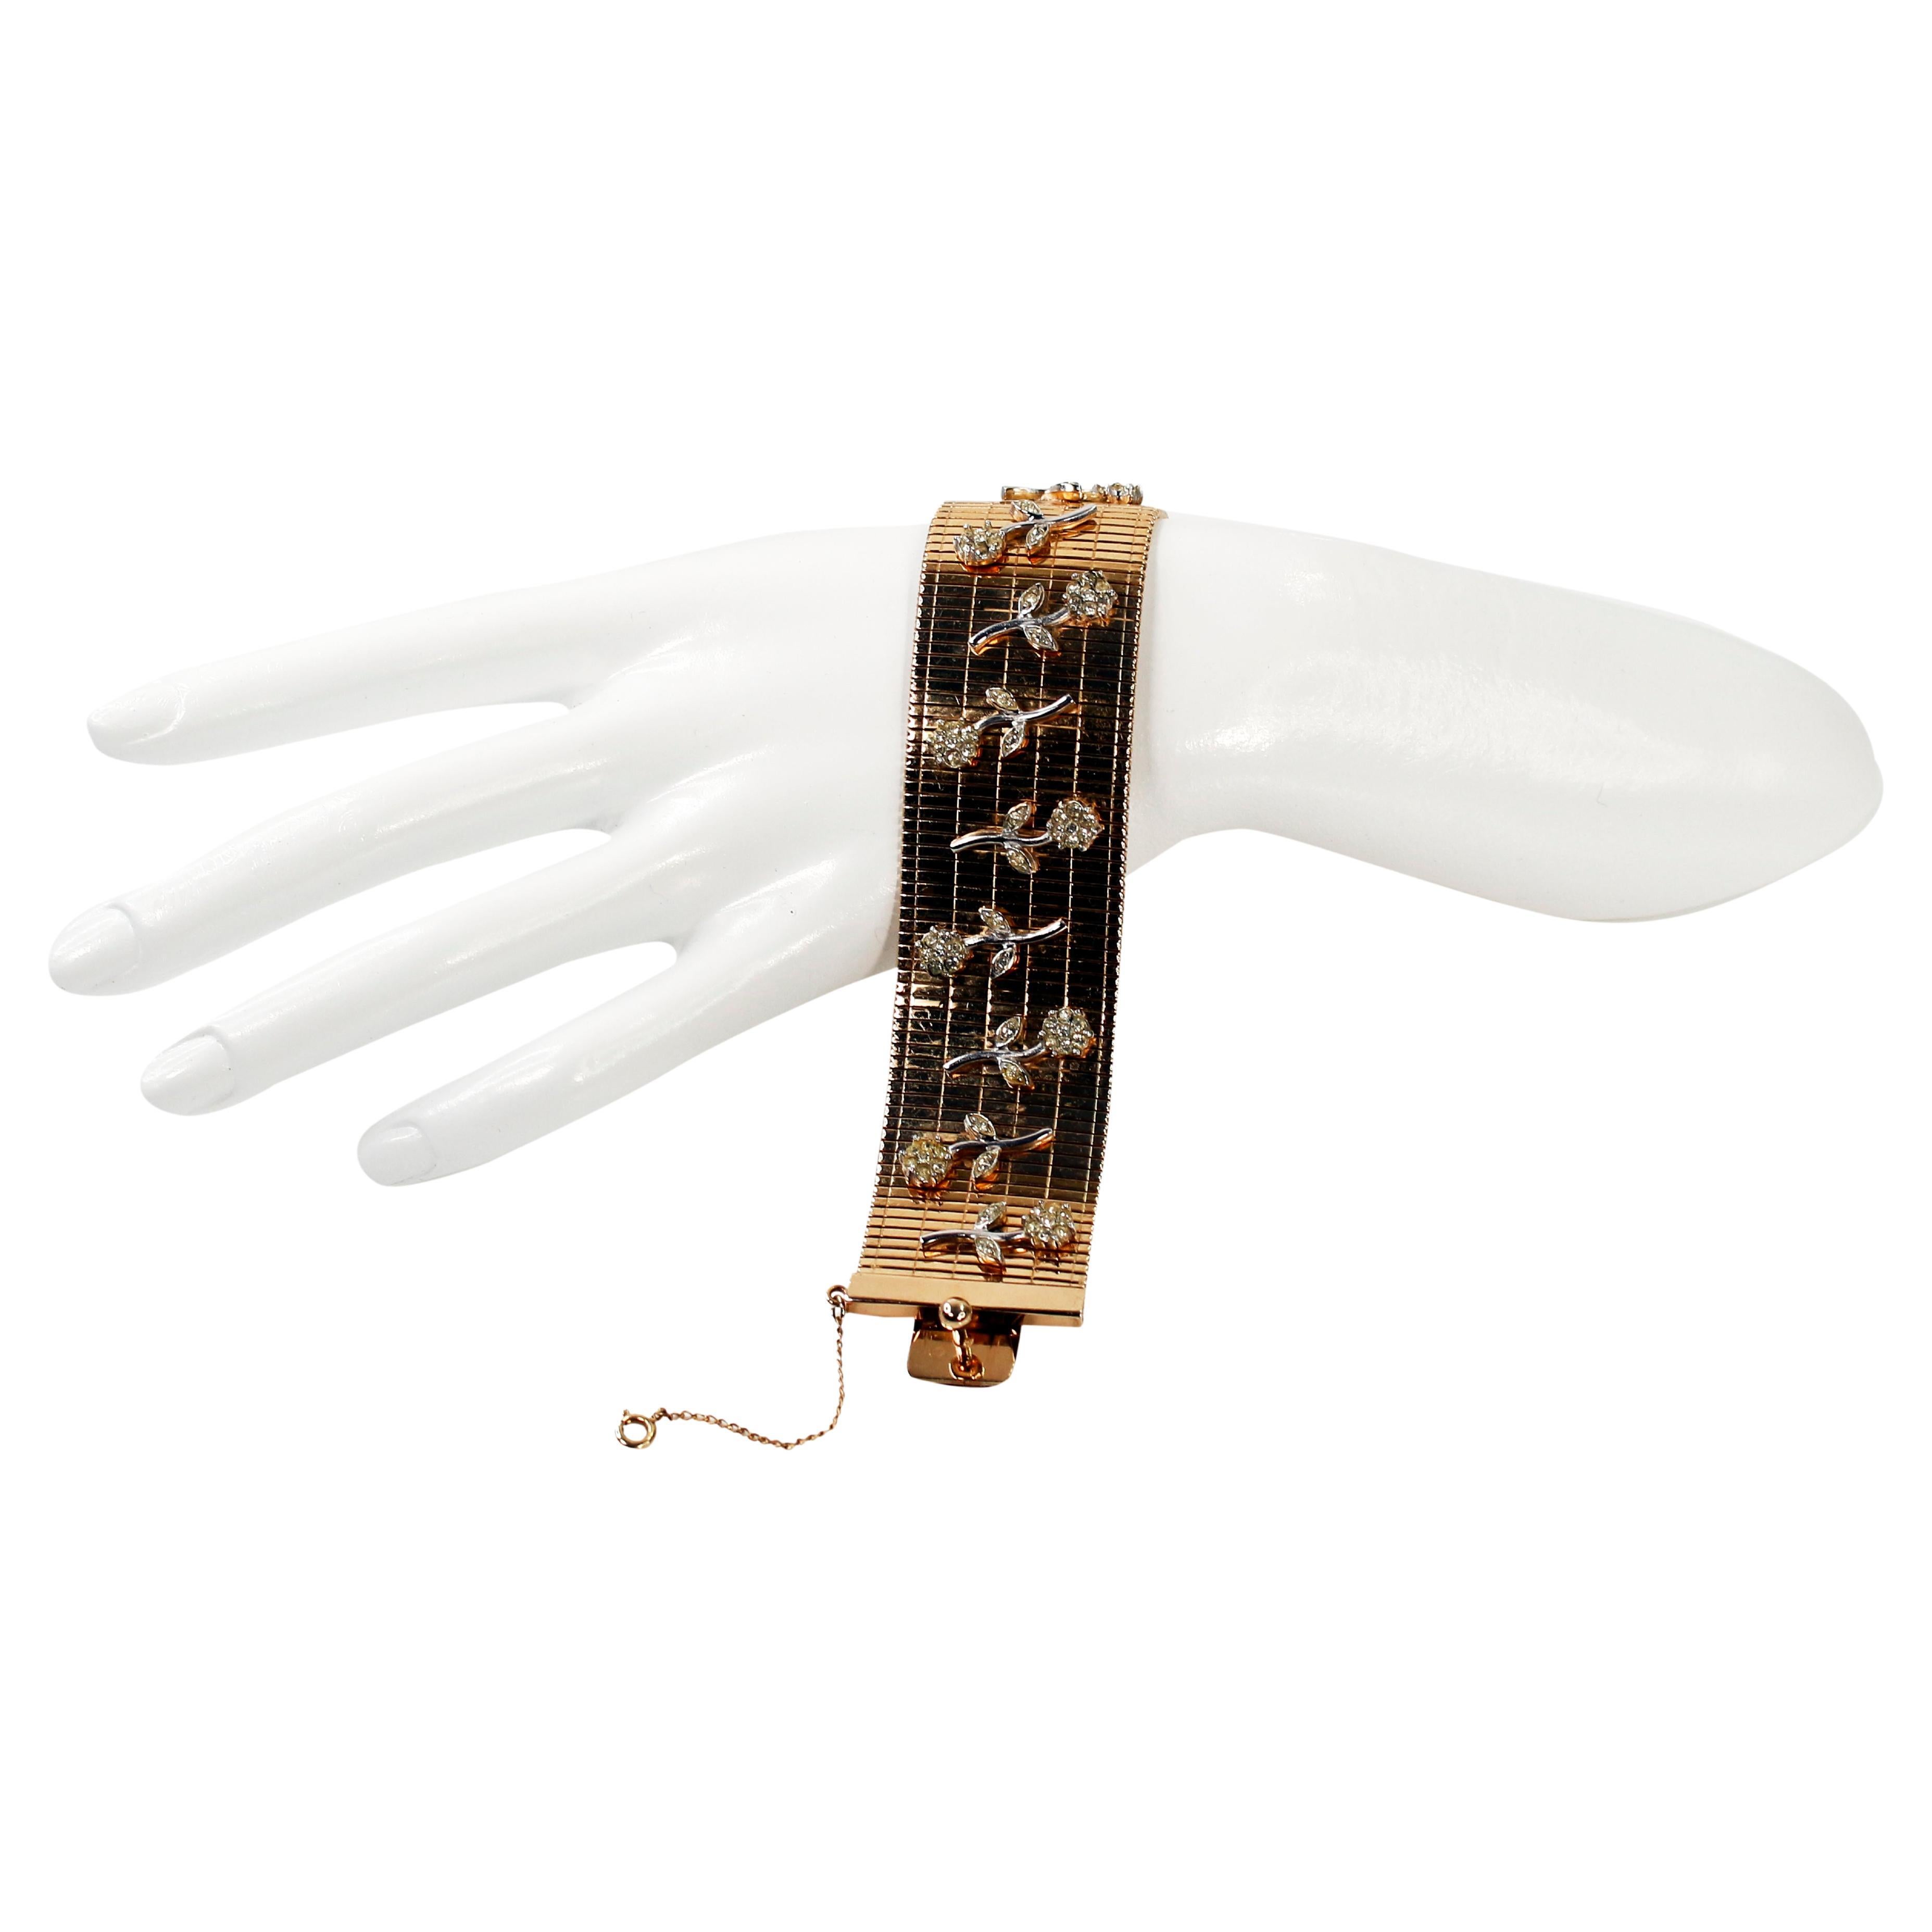 Vintage Bergere Flexible Gold Bracelet with Pieces of Silver Flower on Top.  A Costume Piece that mimics Fine.  Small Pave Crystal set on Top of the Gold Bracelet in Silver Tone Flowers. Exceptional.  This piece has all the attention to detail and